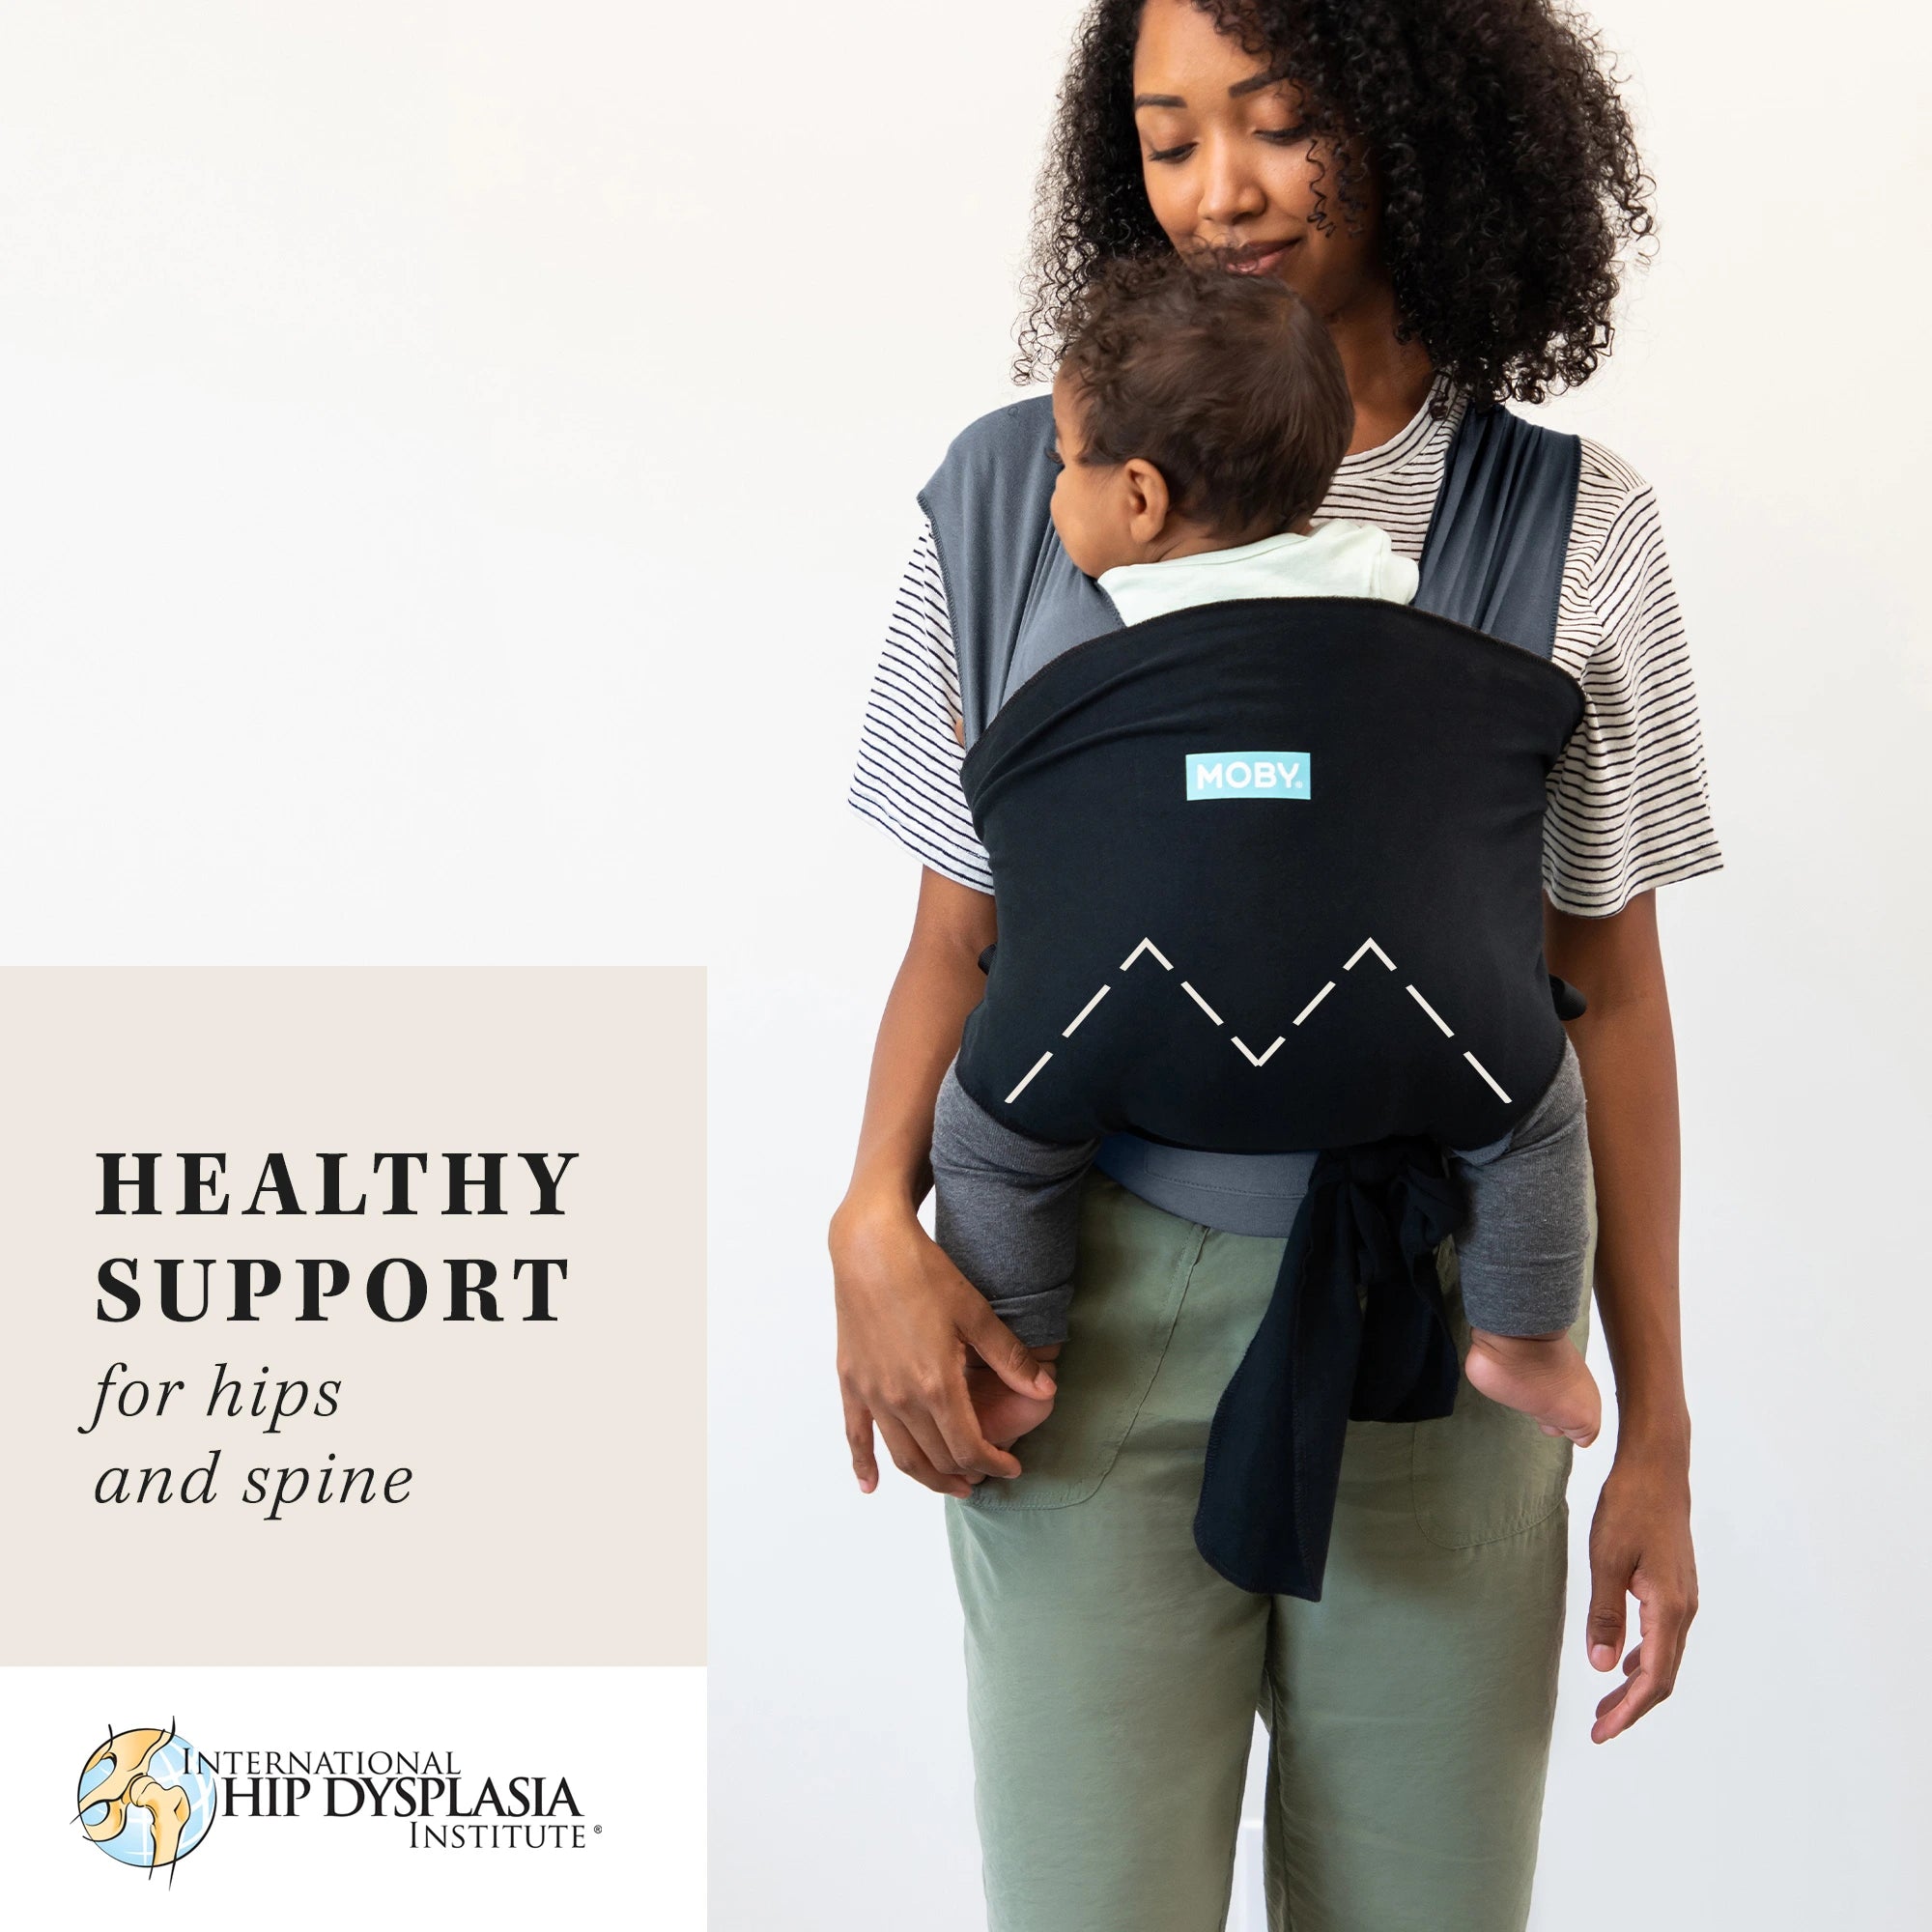 moby easy-wrap healthy support for hips and spine certified by international hip dysplasia institute